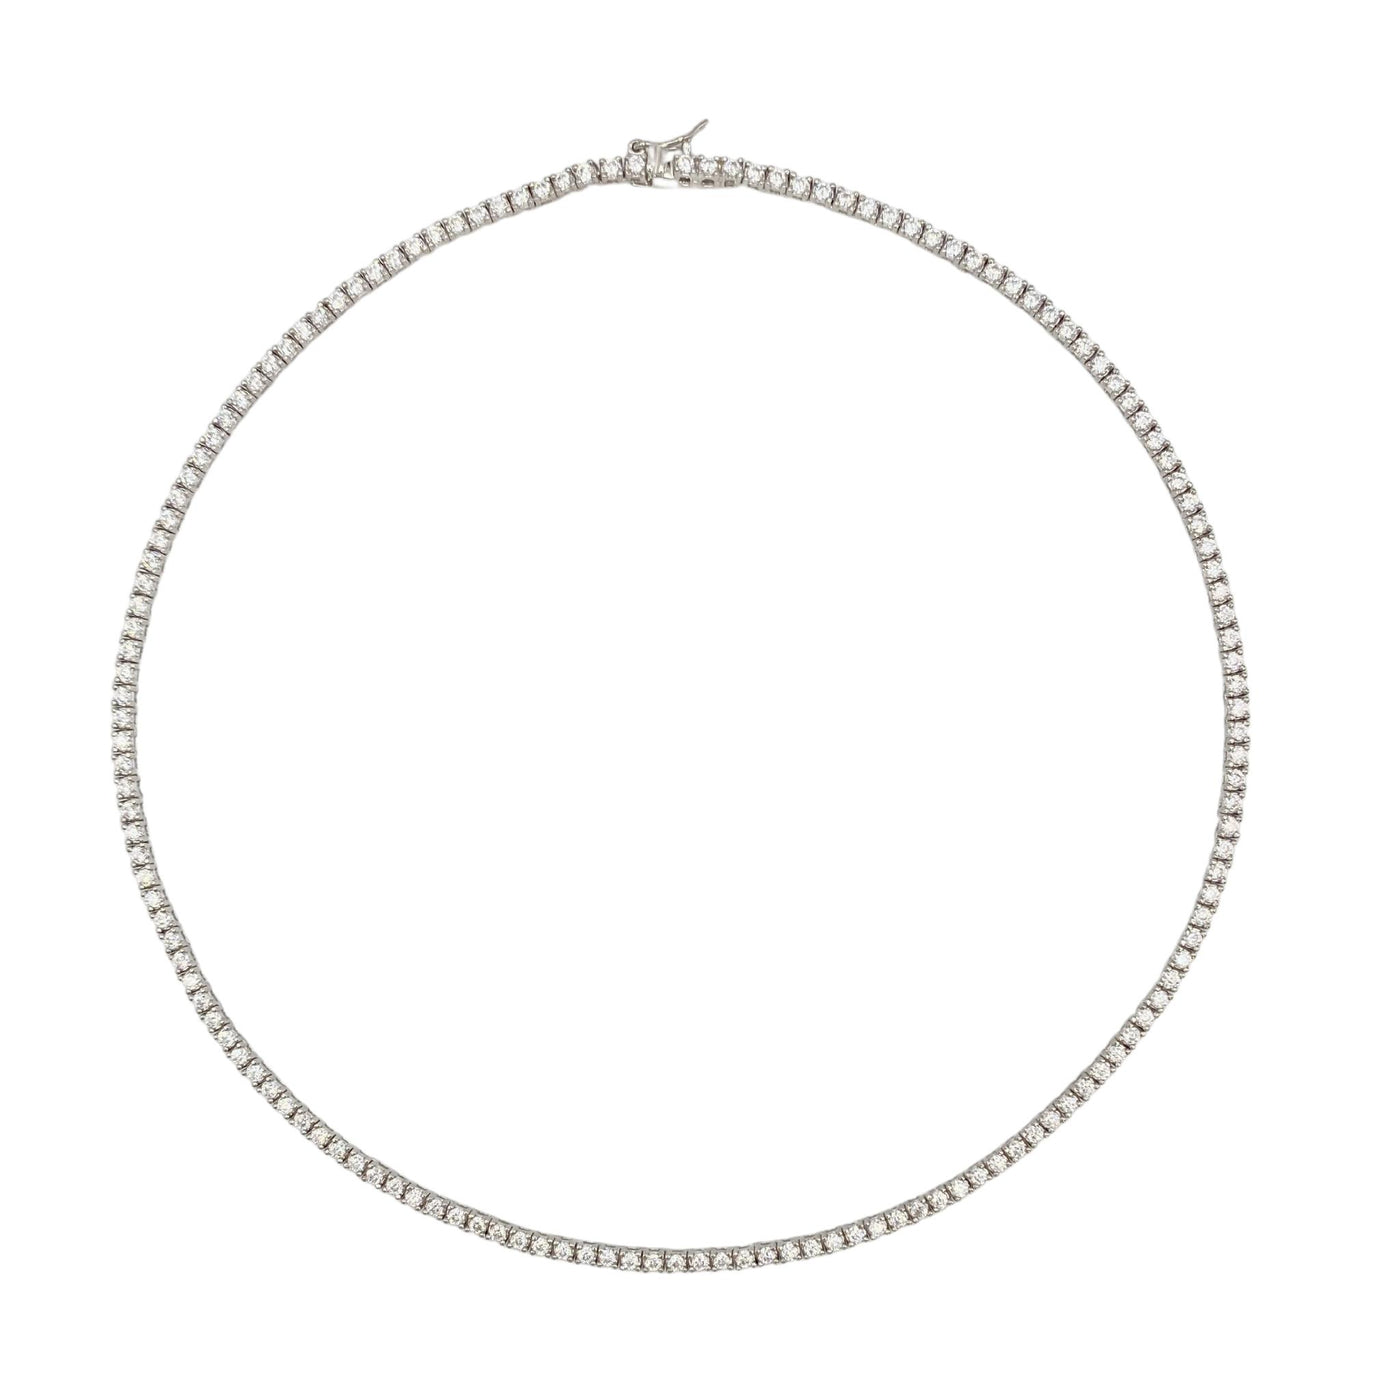 Silver casting tennis necklace with white round stones - 2 mm